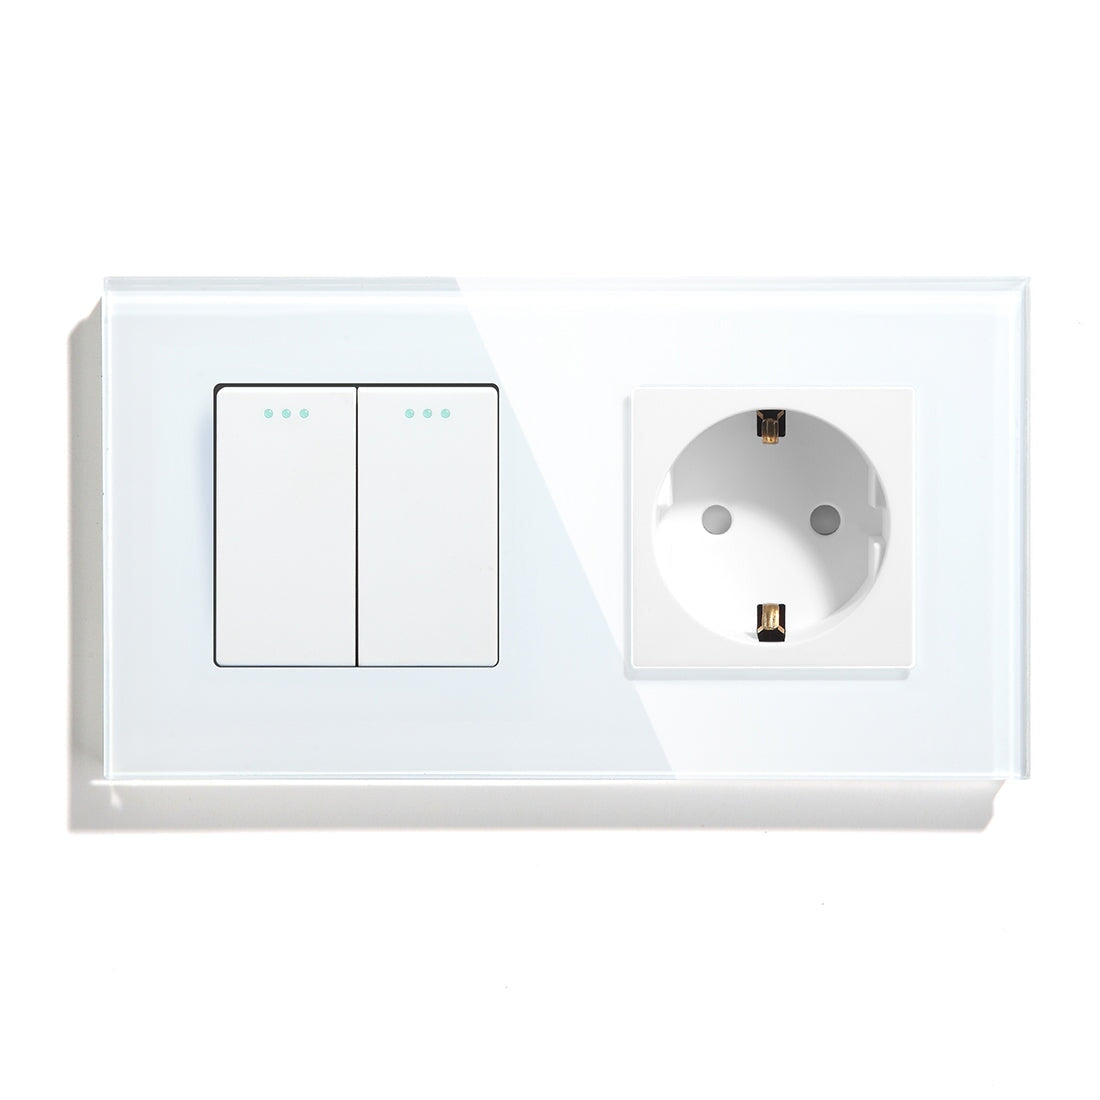 BSEED Mechanical 1/2/3 Gang 1/2Way Touch Light Switch With Normal Eu Socket Power Outlets & Sockets Bseedswitch White 1Gang 2Way